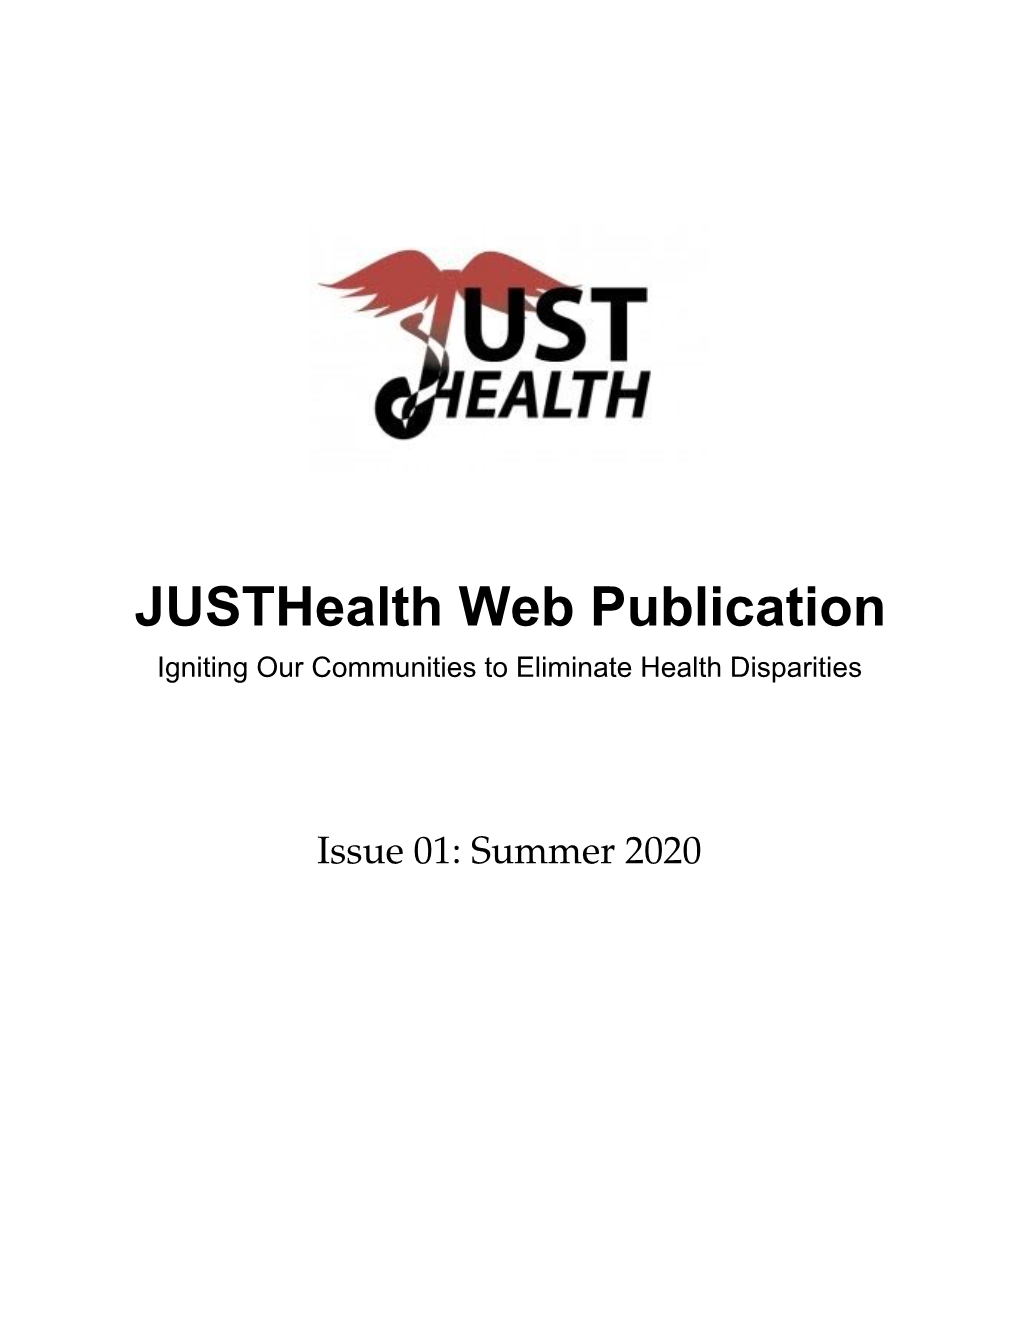 Justhealth Web Publication Igniting Our Communities to Eliminate Health Disparities